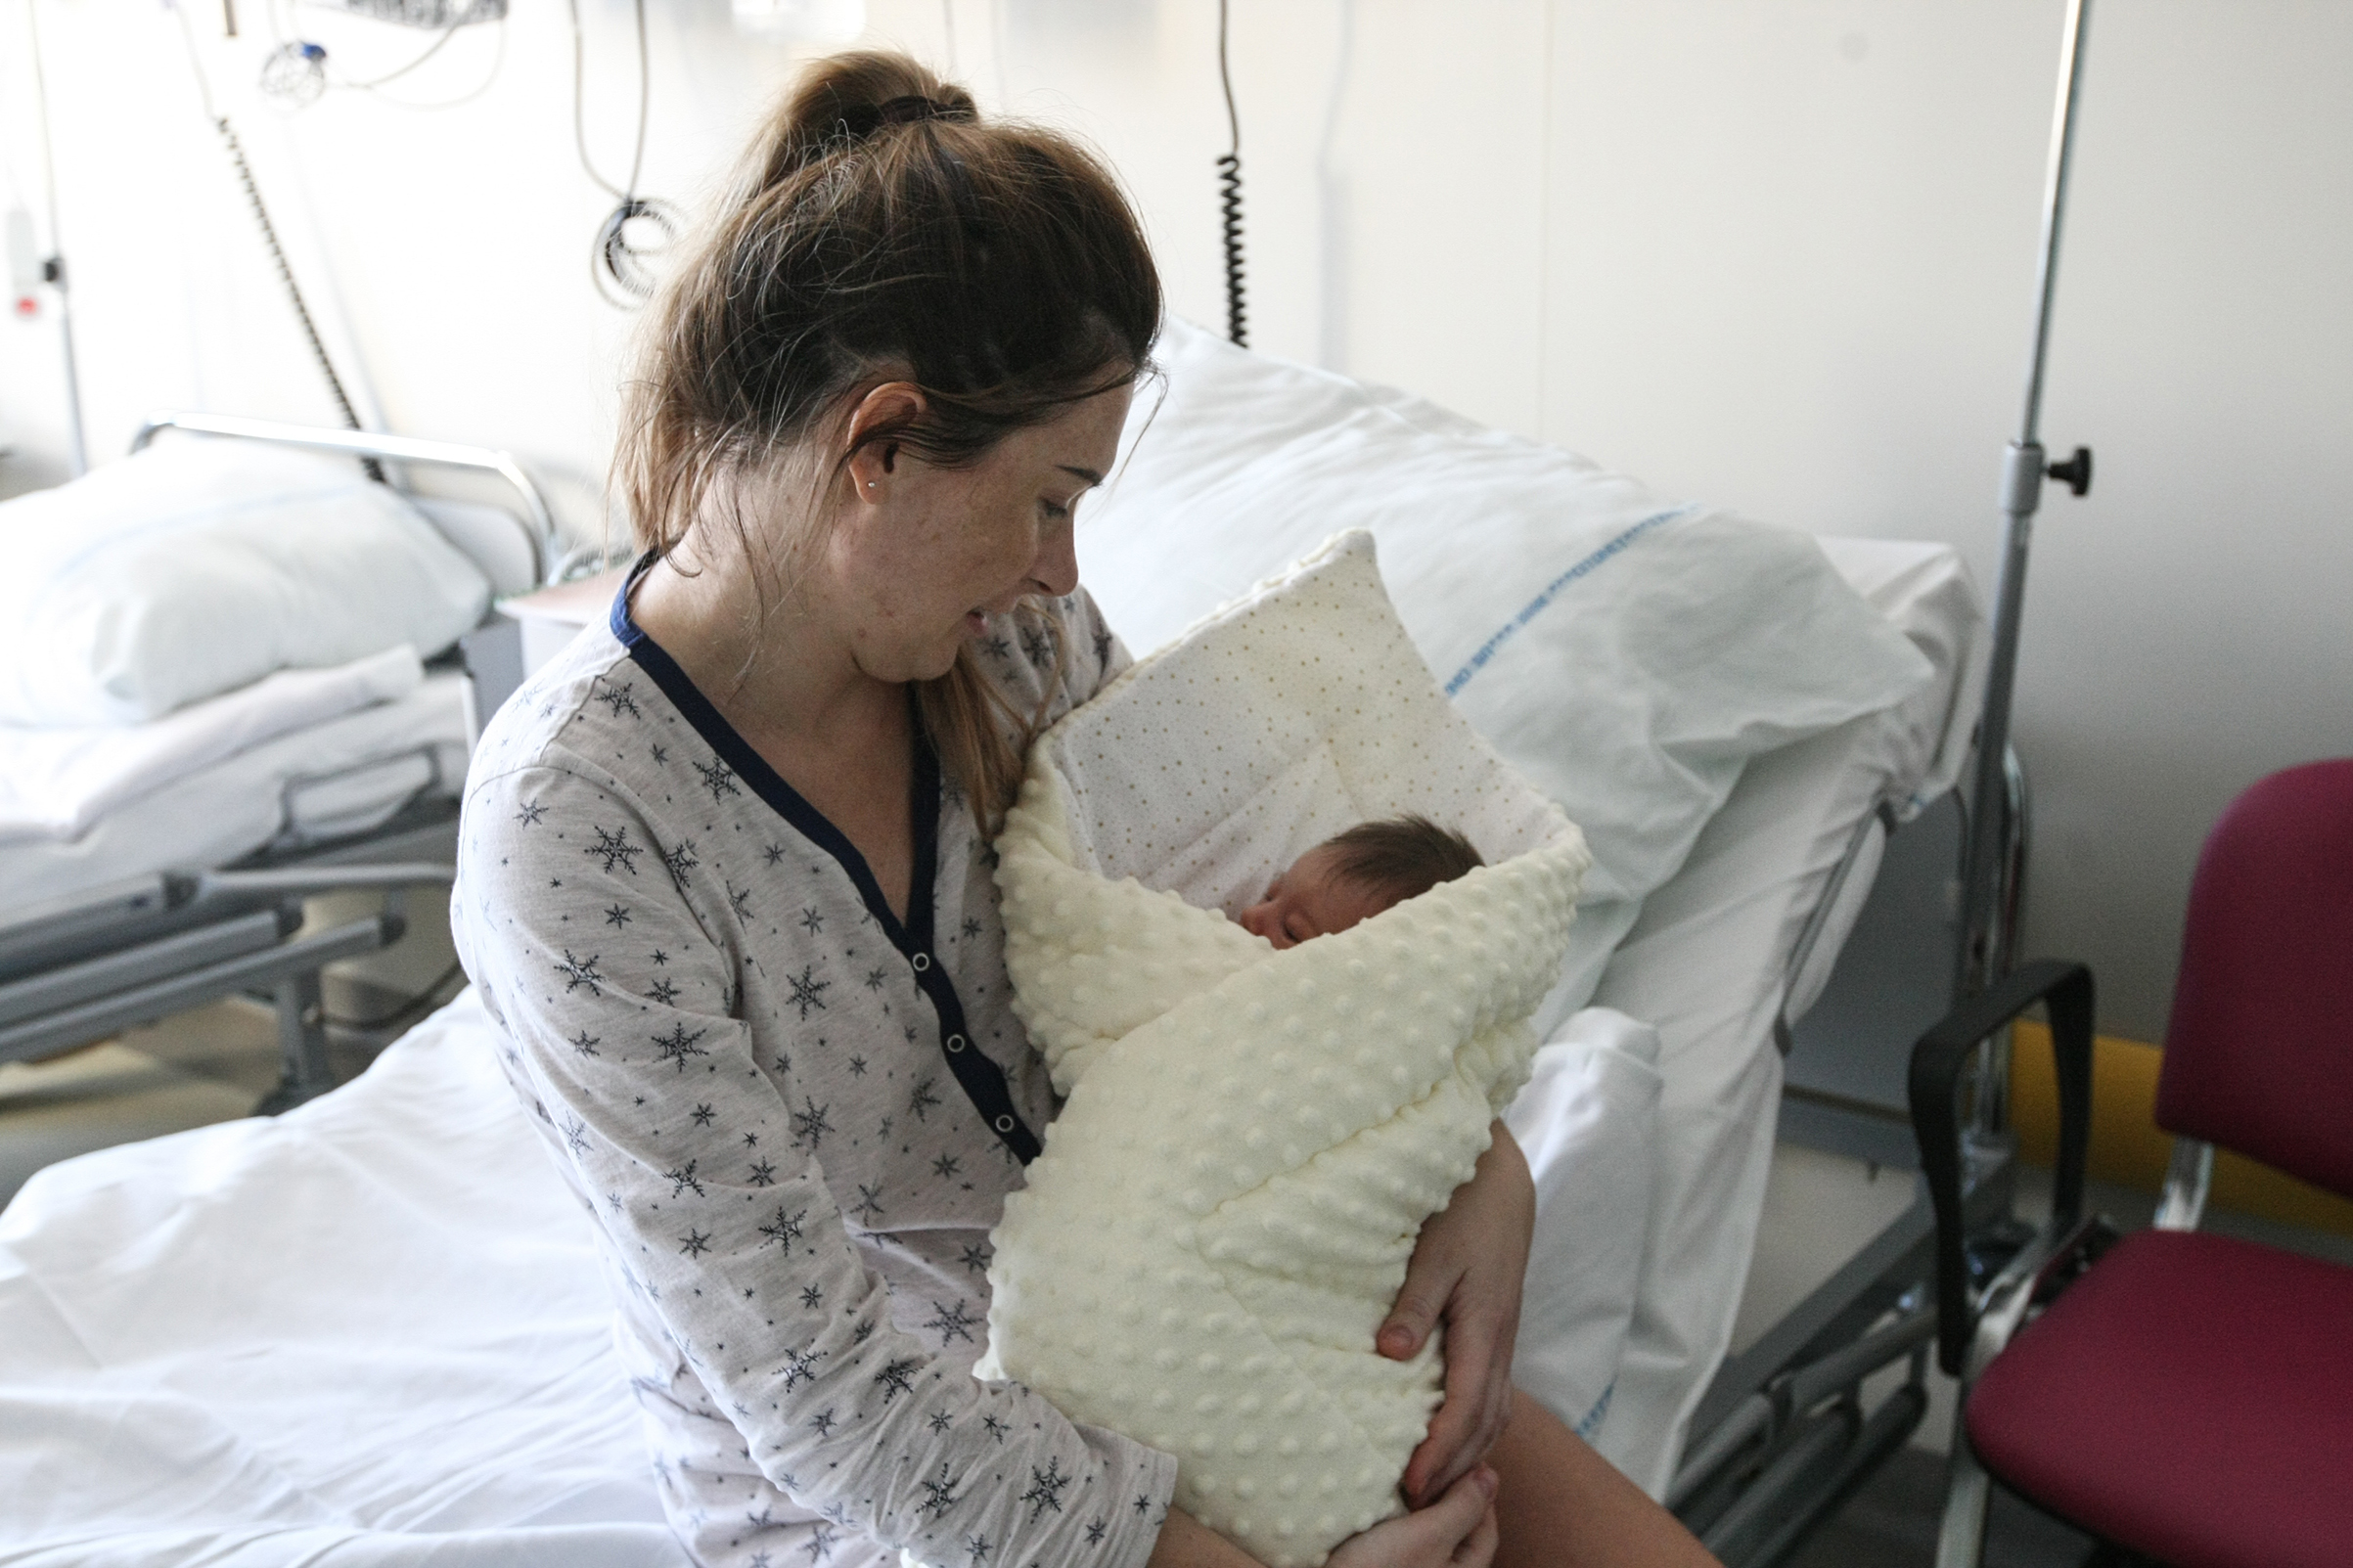 Polish demographers say, that due the child benefit  launched in 2016 by the ruling conservative Law and Justice party (PiS) number of births is expected to rise, but the trend will not offset the overall fall in the population in the long term. Agnieszka Gessela and her newborn daughter Helena are seen in maternity hospital delivery room  in Gdansk, Poland on December 20, 2017 (Michal Fludra—Getty Images)